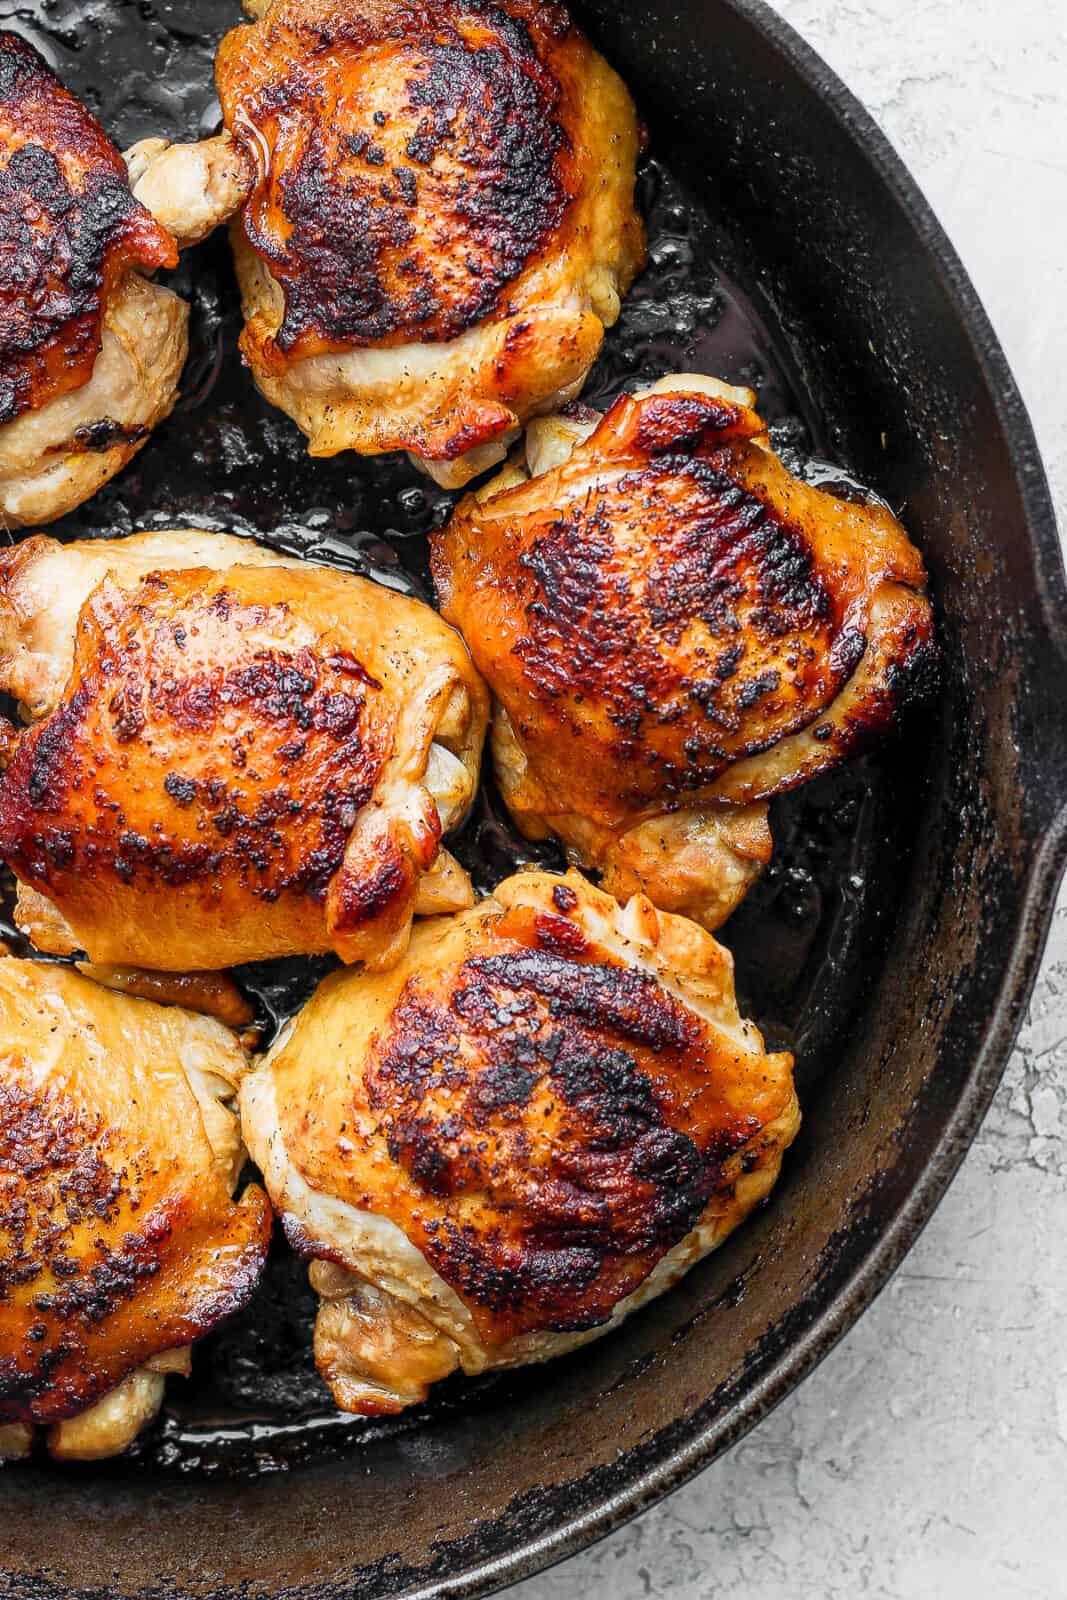 Seared chicken thighs in a cast iron skillet.